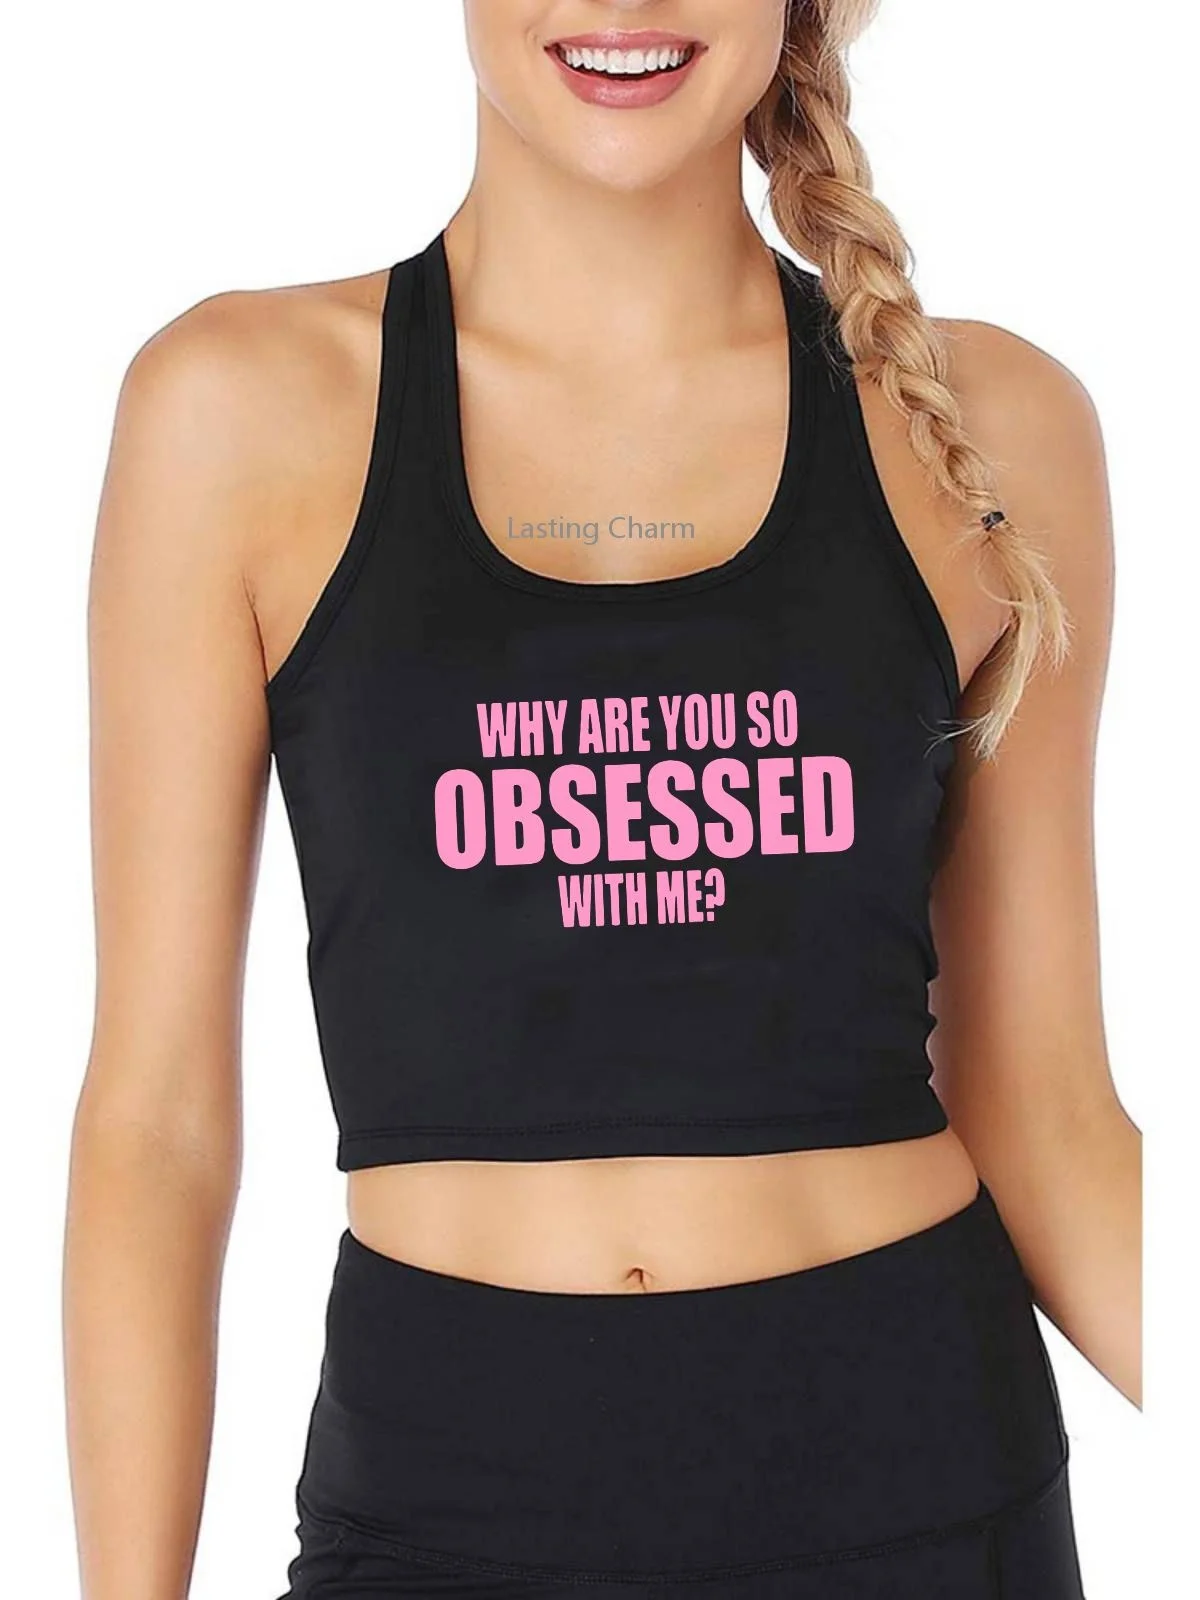 

Why are you so obsessed with me Print Tank Top Adult Humor Fun Flirty Print Yoga Sports Workout Crop Top Gym Tops